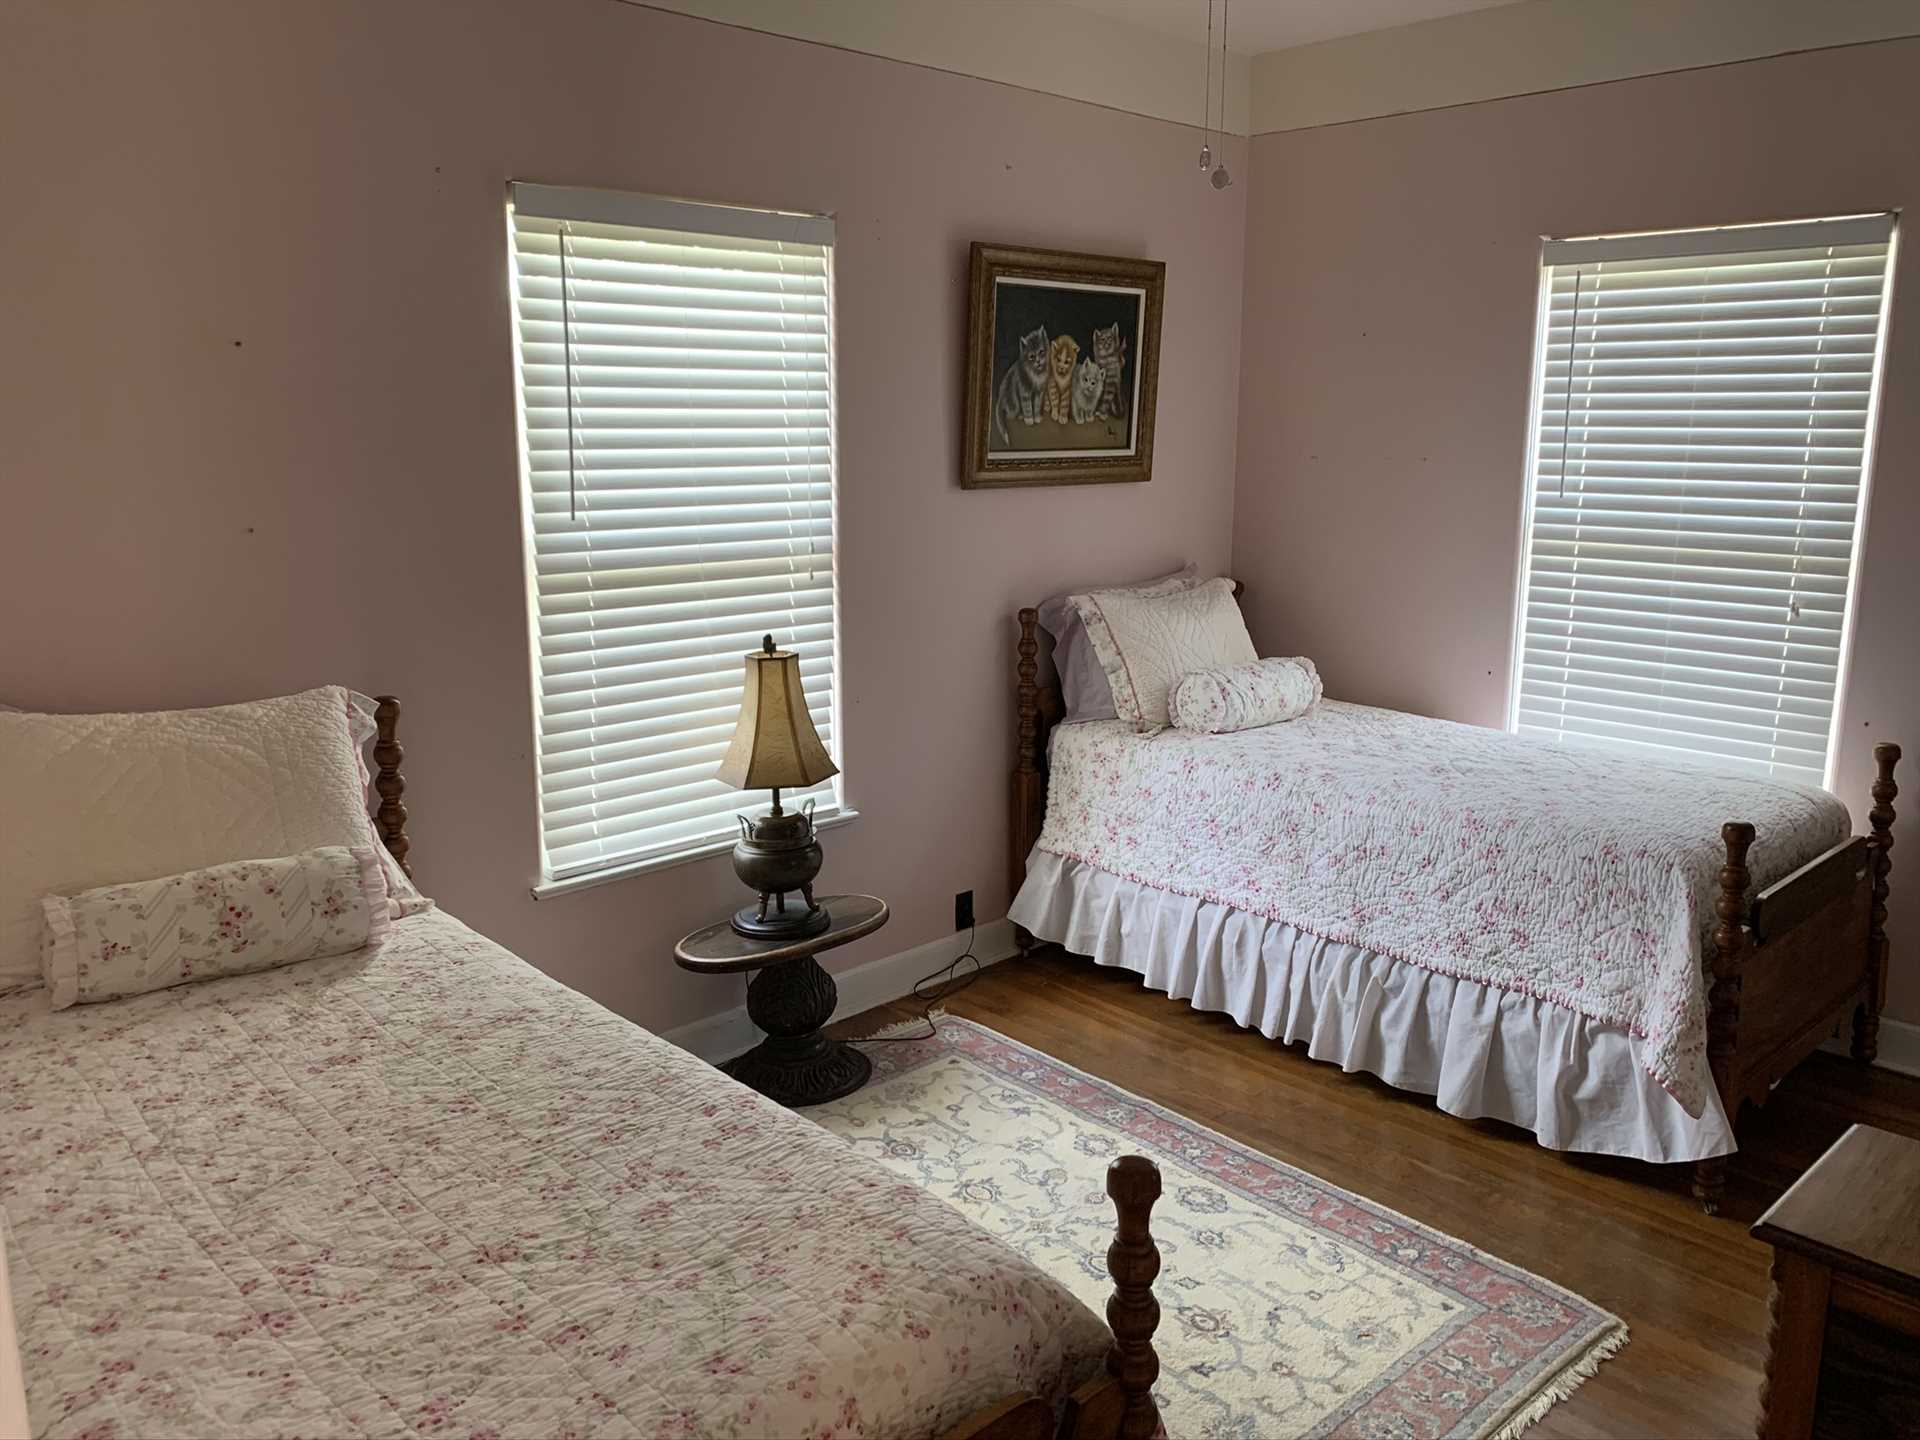                                                 Here's the fourth bedroom, with two twin beds. Overall, there's restful sleeping space for up to ten people, and all beds are covered with clean and comfy linens.